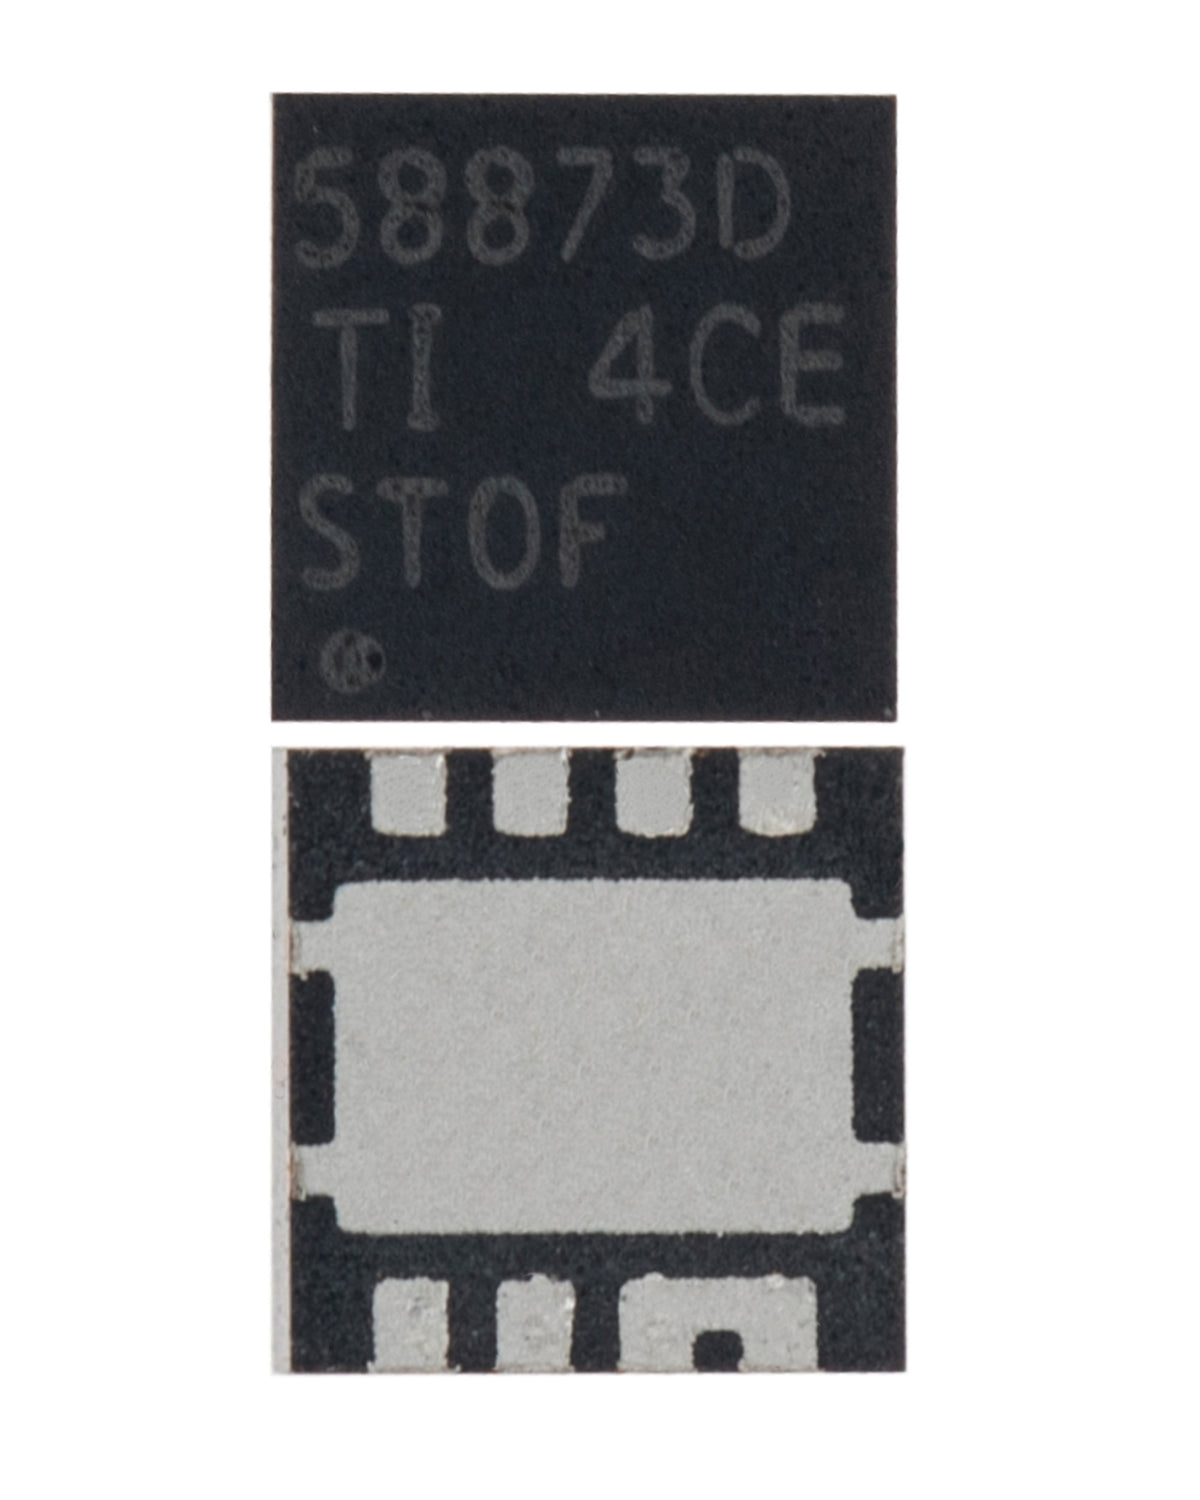 SYNCHRONOUS BUCK NEXFET™ POWER BLOCK MOSFET PAIR CONTROLLERS IC COMPATIBLE WITH MACBOOKS (CSD58873Q3D / CSD58873D / 58873D: QFN-8 PIN)